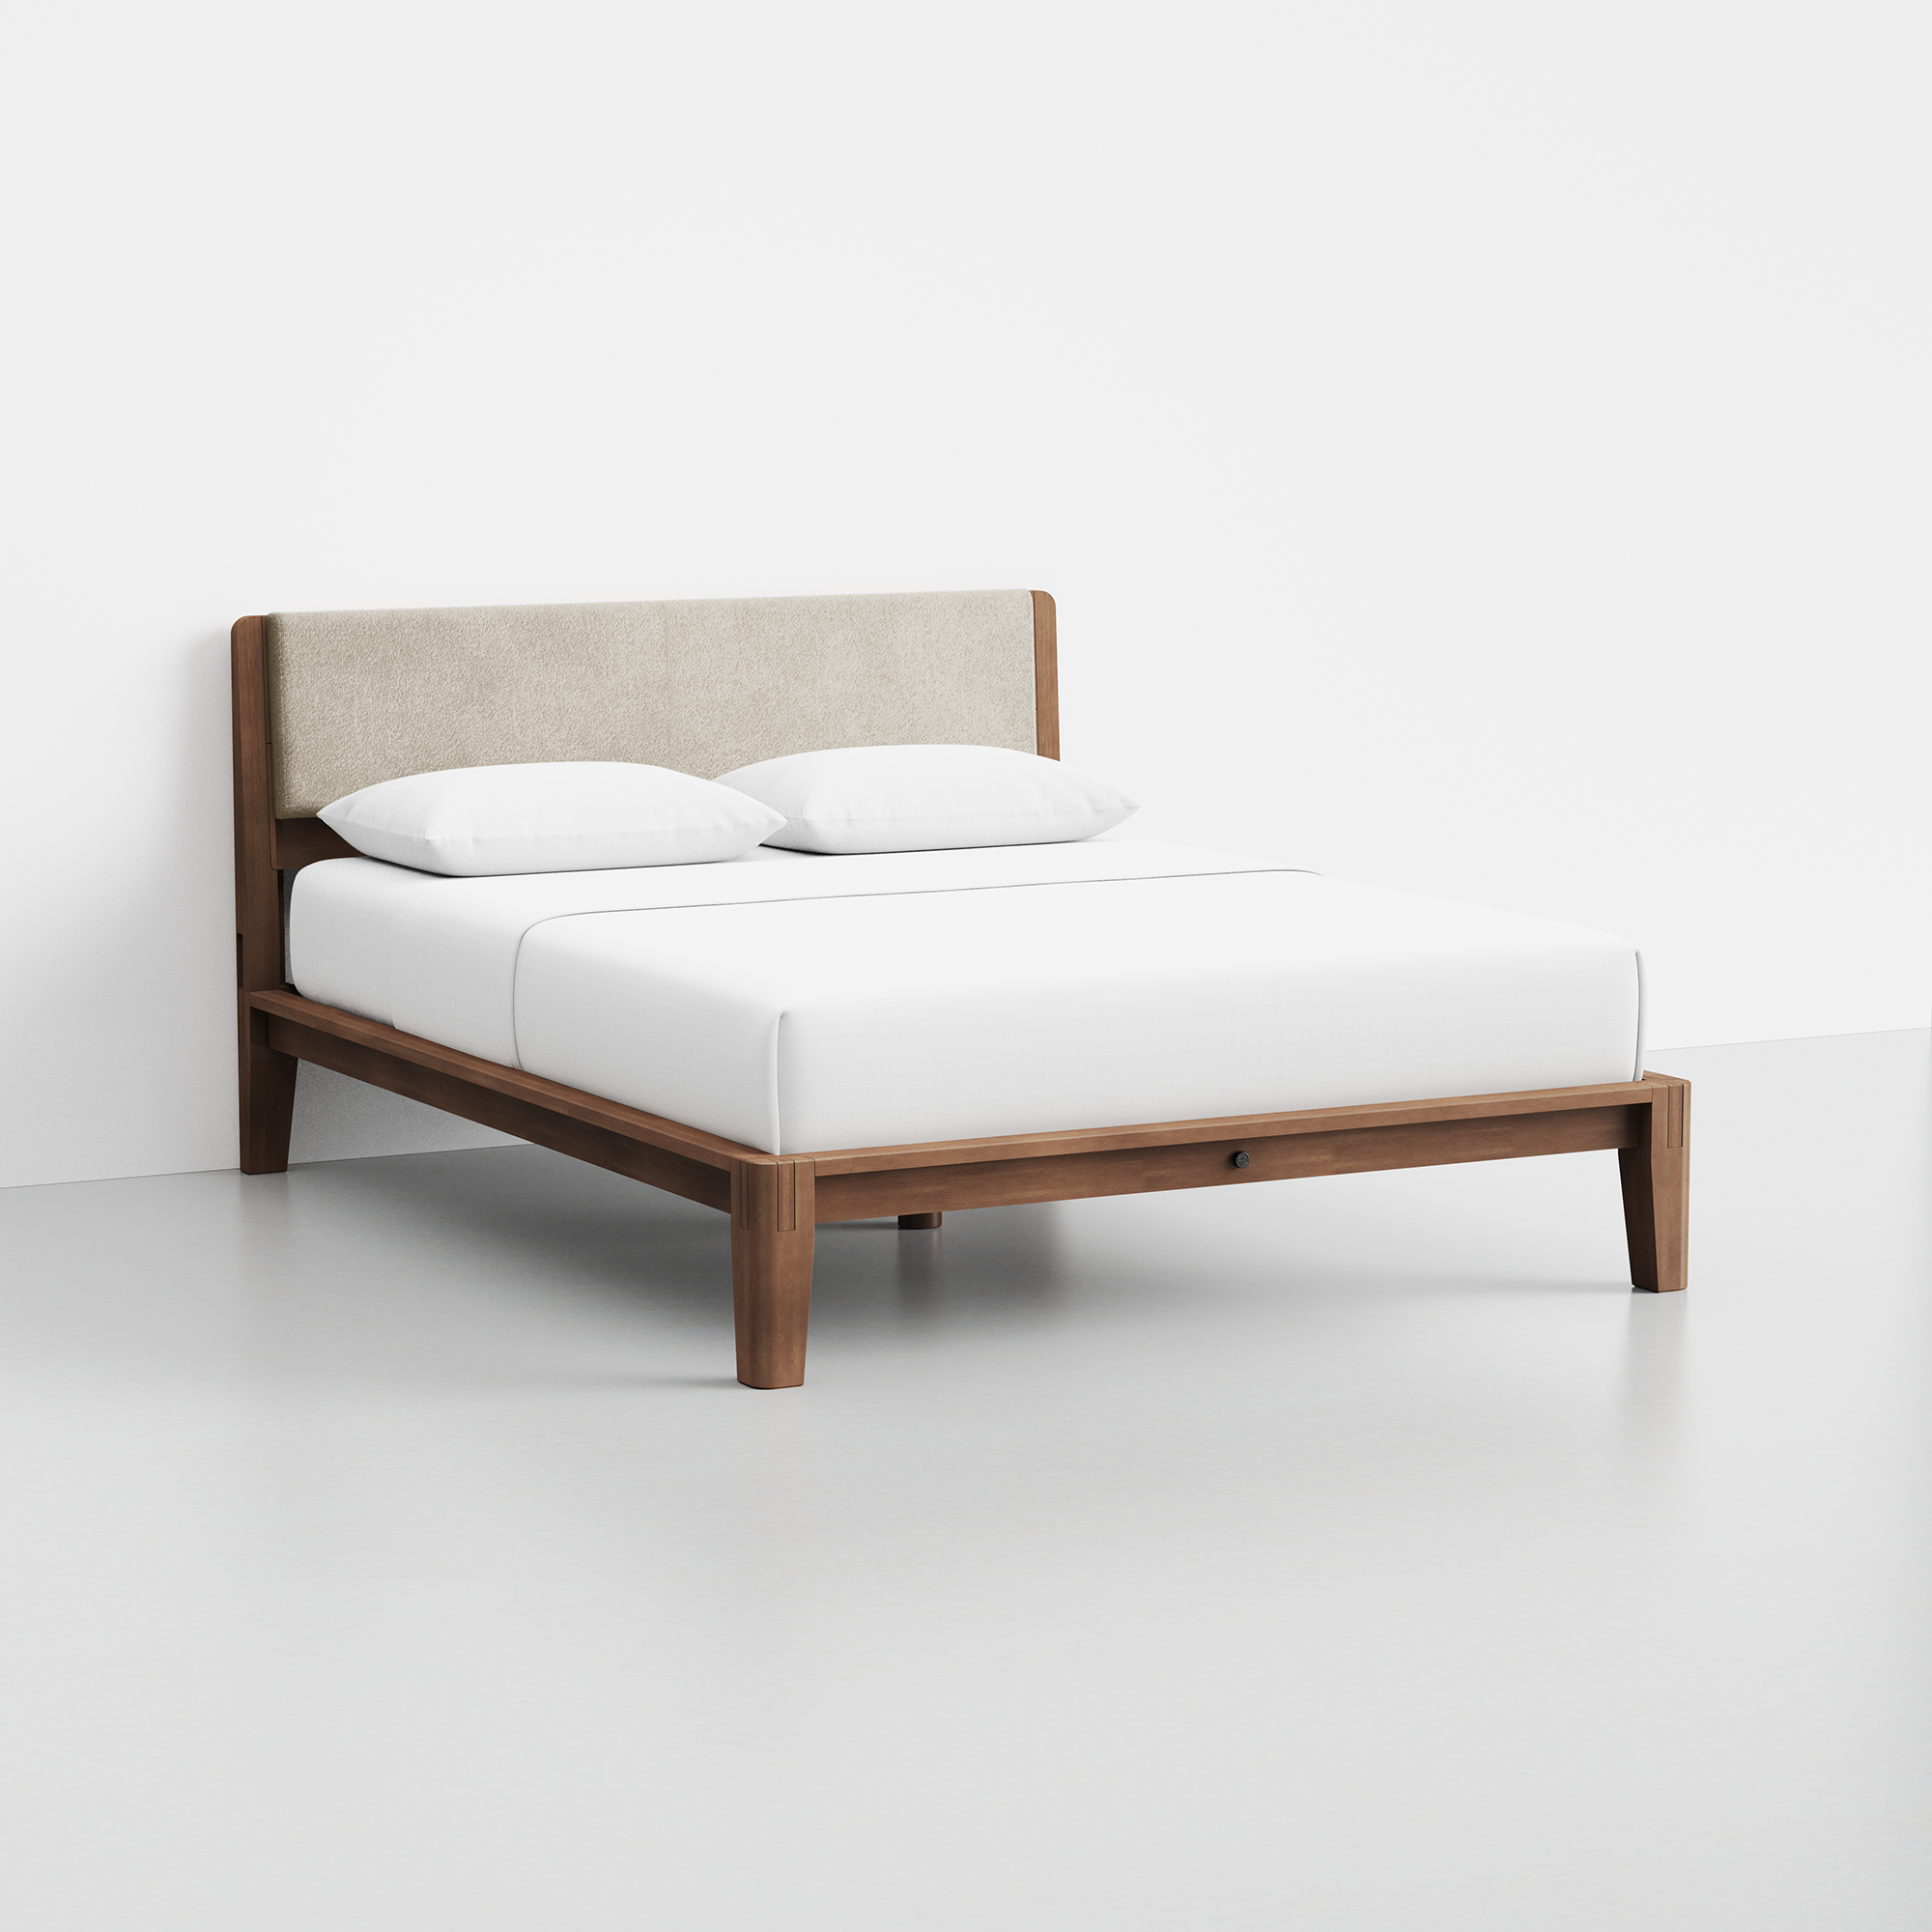 The Bed (Walnut / HB Cushion Cafe) - Render - Angled